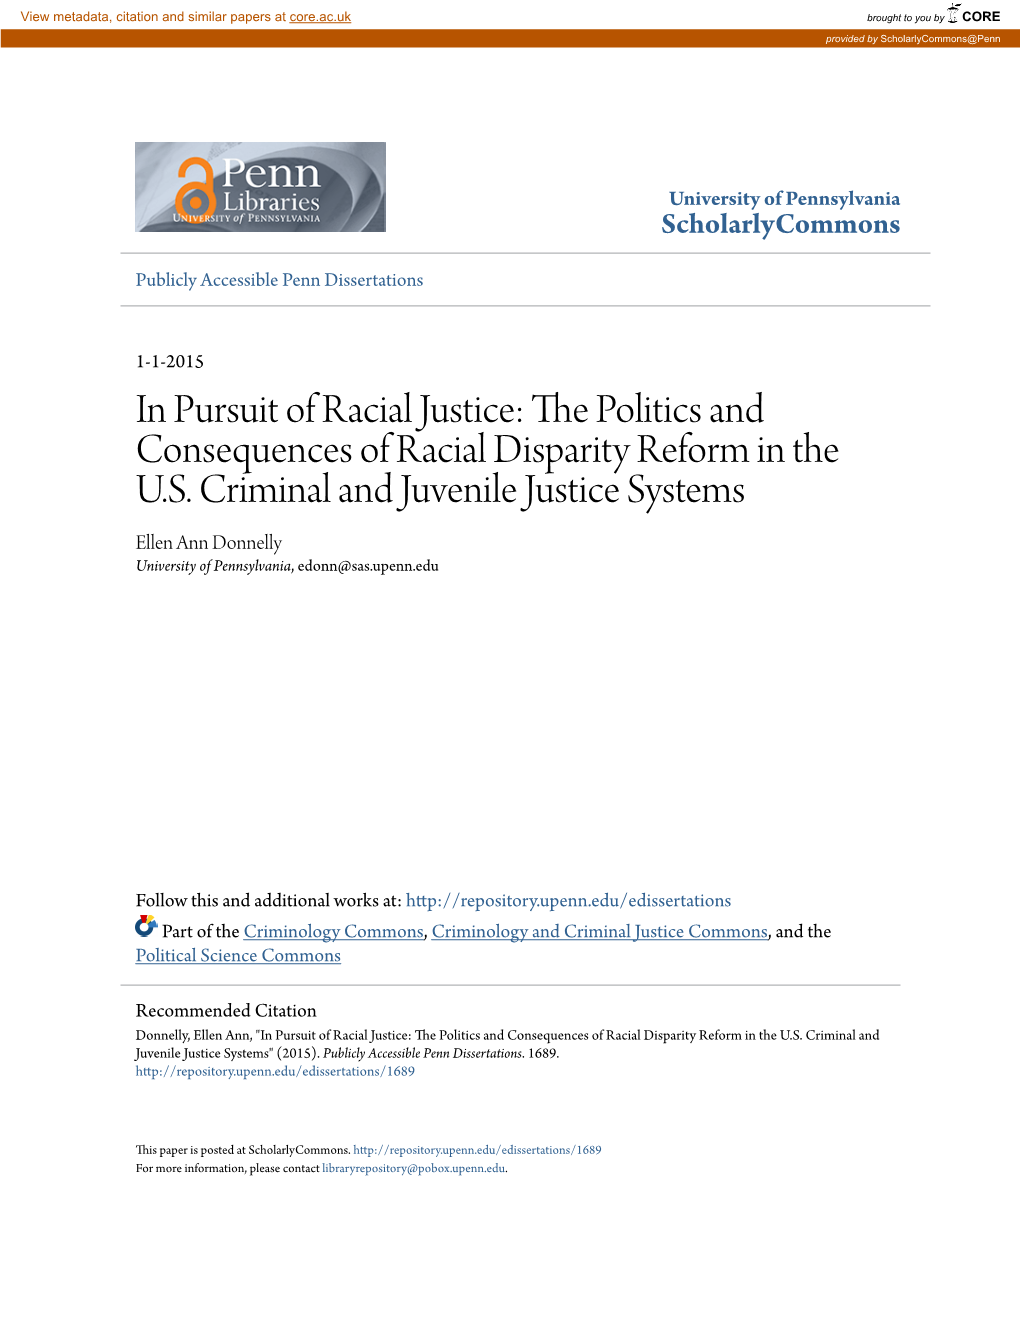 In Pursuit of Racial Justice: the Olitp Ics and Consequences of Racial Disparity Reform in the U.S